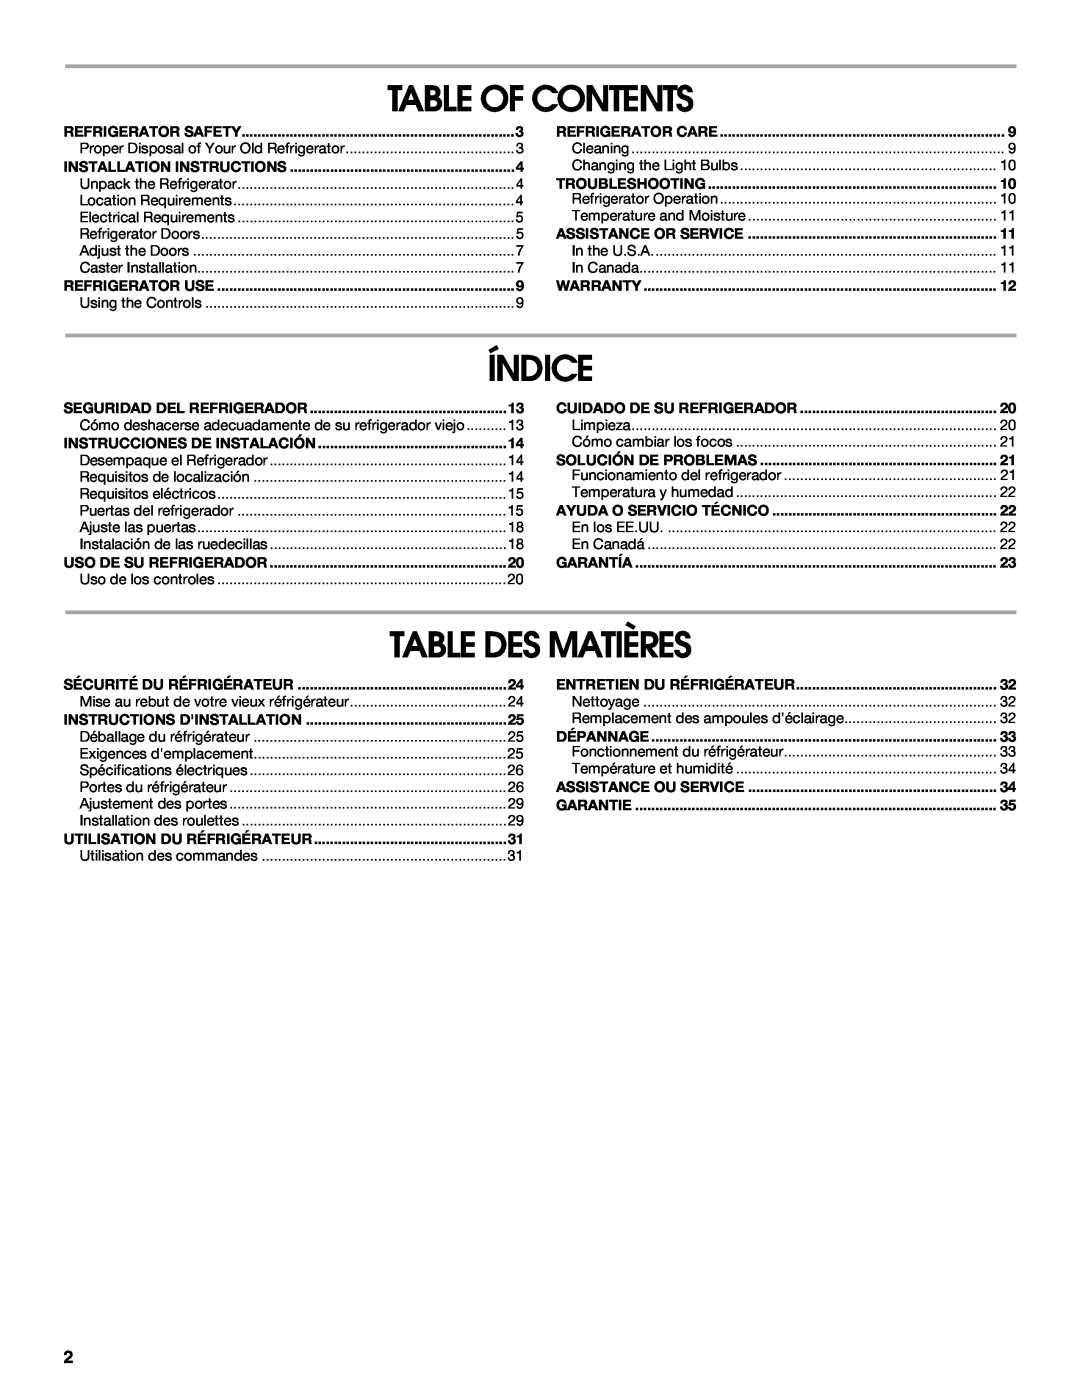 Whirlpool GARAGE REFRIGERATOR manual Table Of Contents, Índice, Table Des Matières 